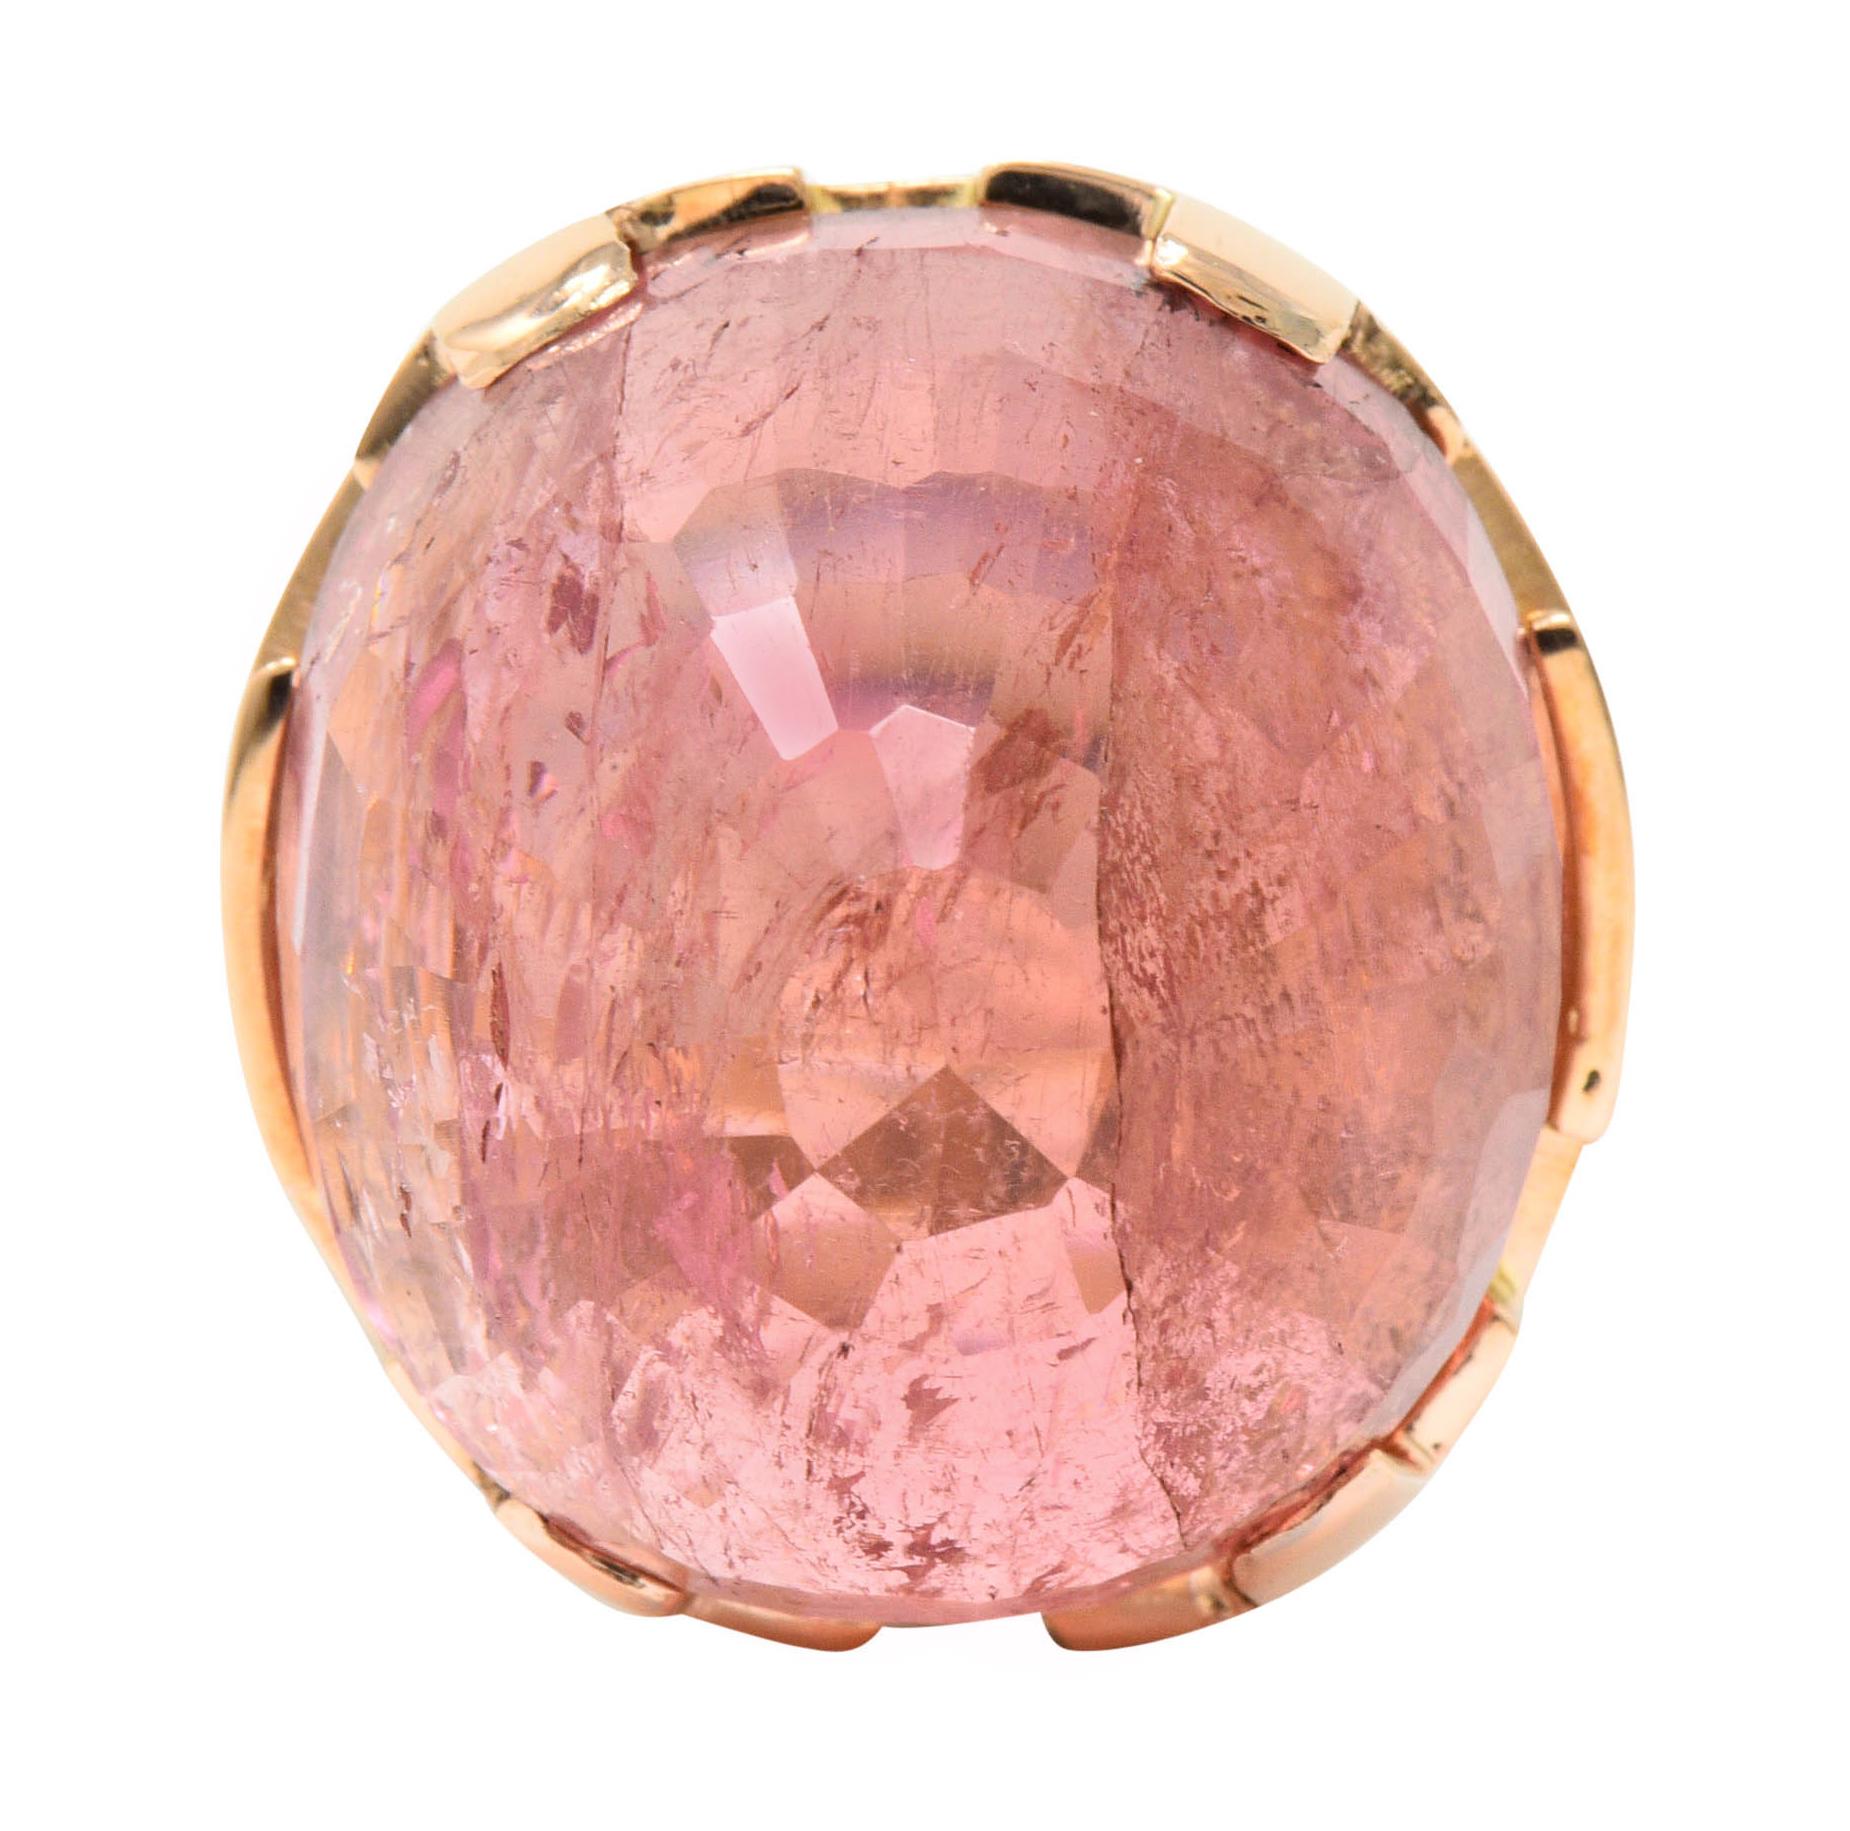 Centering a substantial checkerboard cut pink tourmaline, reverse set as a high dome, measuring approximately 26.0 x 24.0 mm

A very saturated bubble gum pink color and translucent with natural inclusions

Set by wide prongs and features a stylized